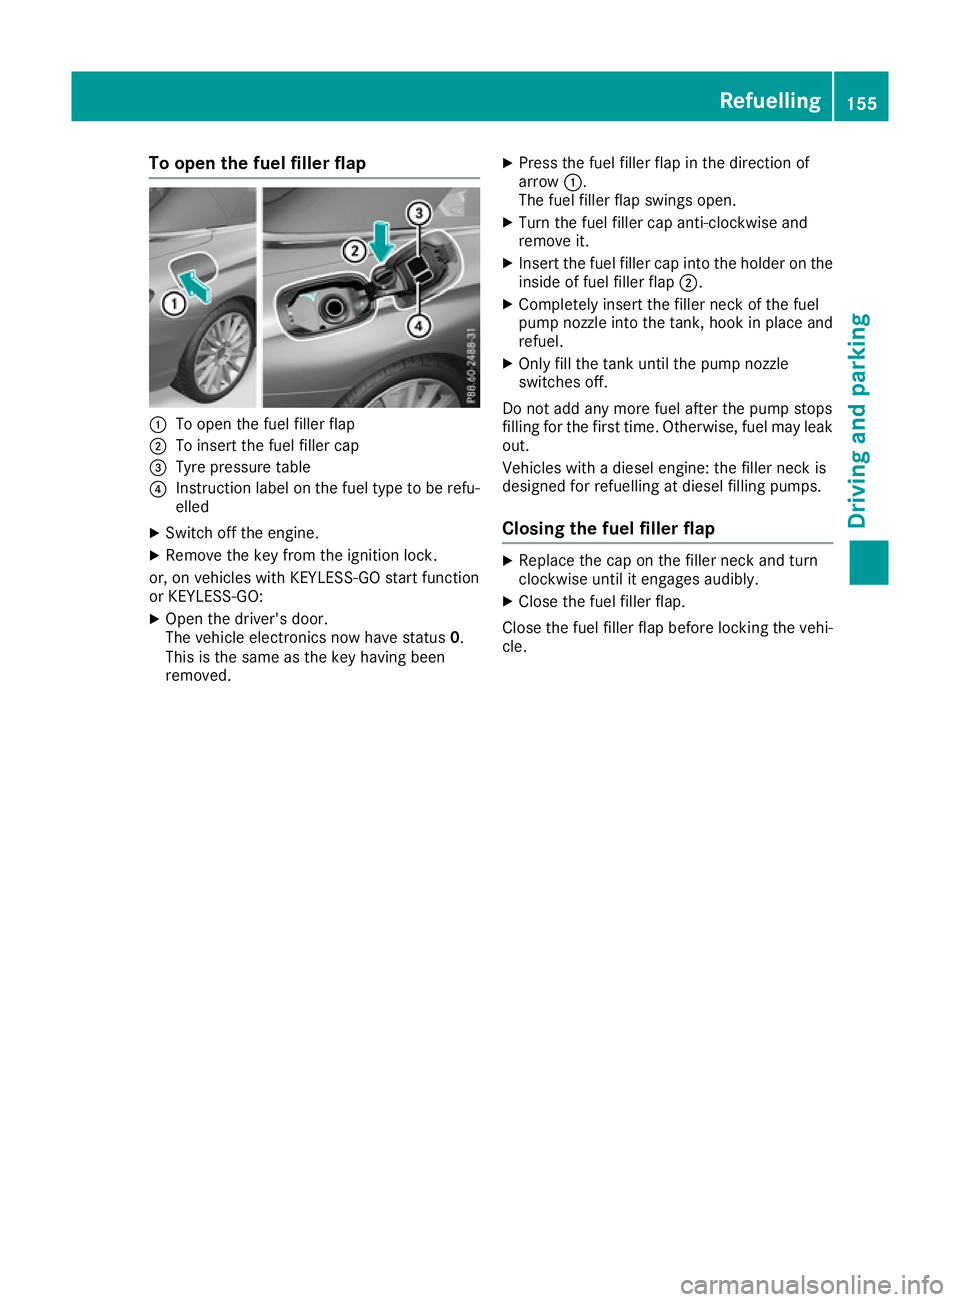 MERCEDES-BENZ C-CLASS CABRIOLET 2016  Owners Manual To open the fuel filler flap
:
To open the fuel filler flap
; To insert the fuel filler cap
= Tyre pressure table
? Instruction label on the fuel type to be refu-
elled
X Switch off the engine.
X Remo